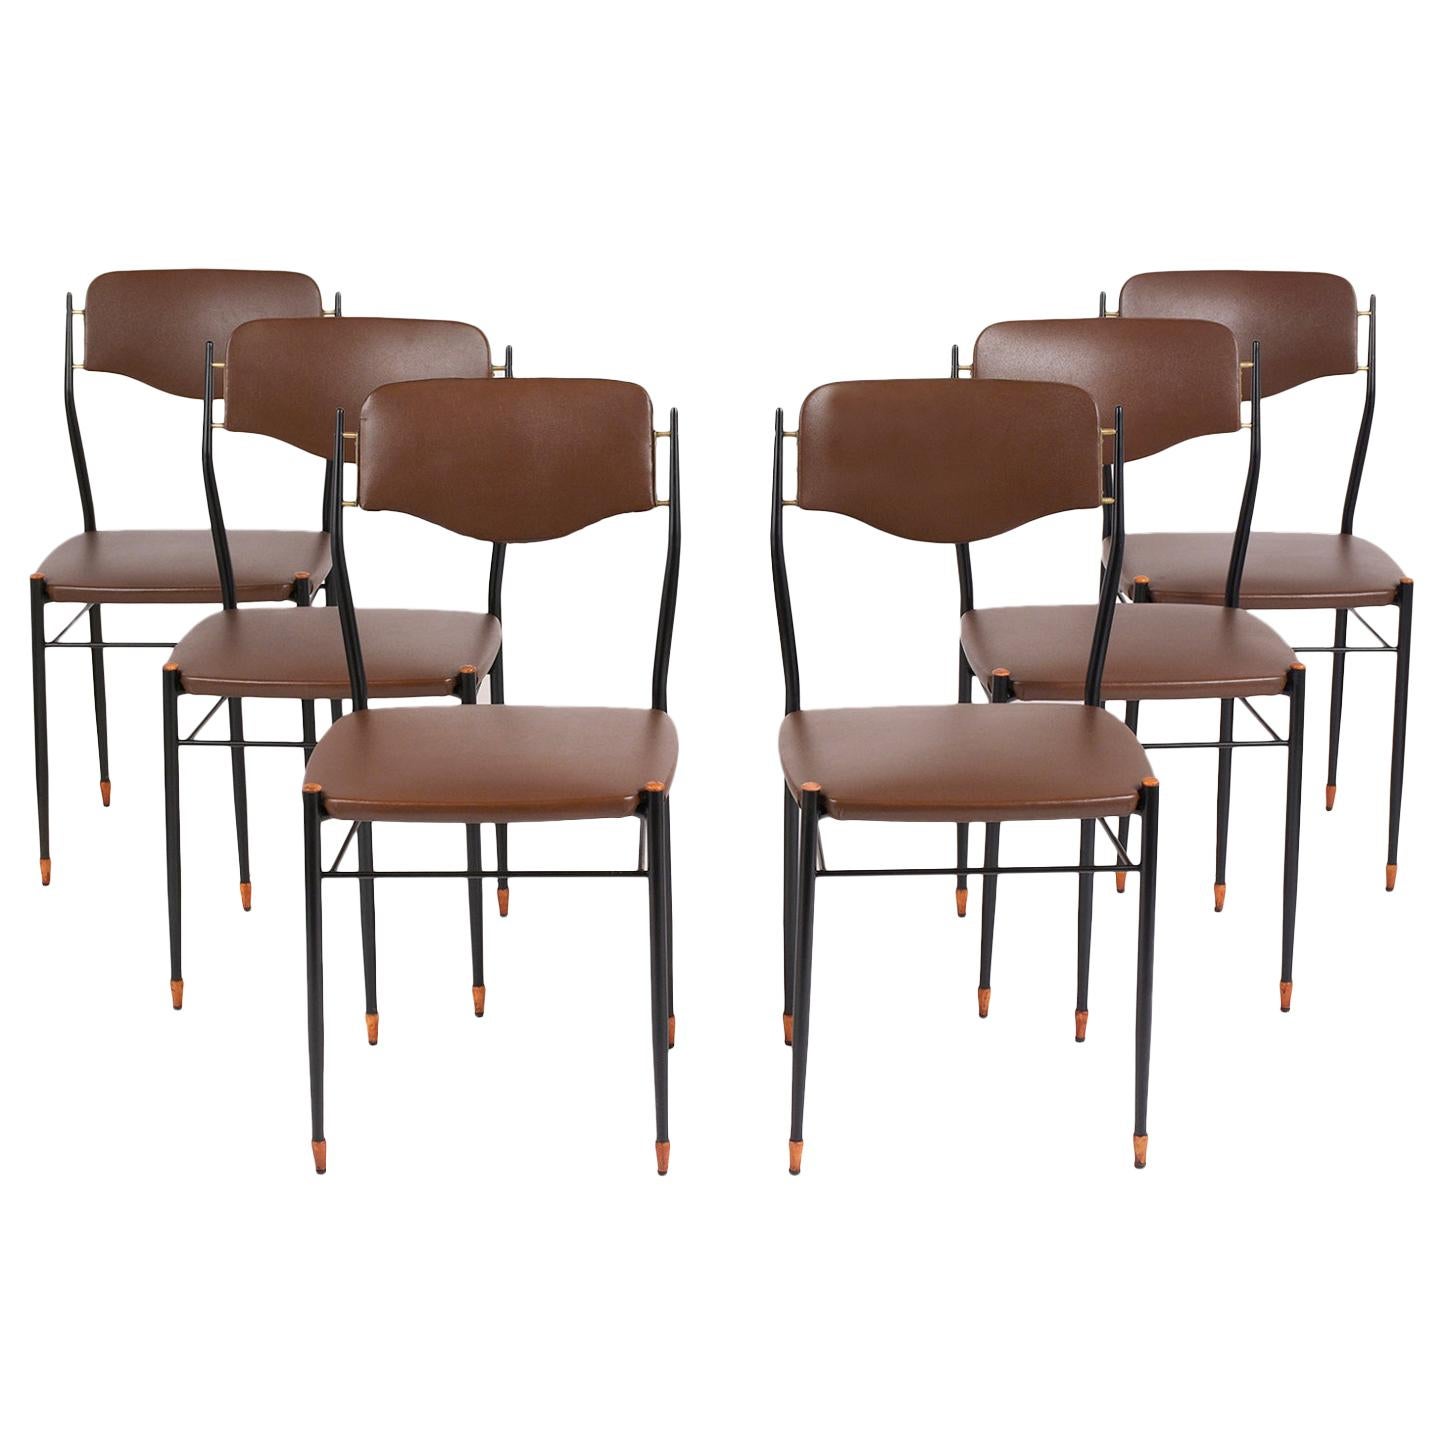 Set of Six Mid-Century Modern Metal Dining Chairs